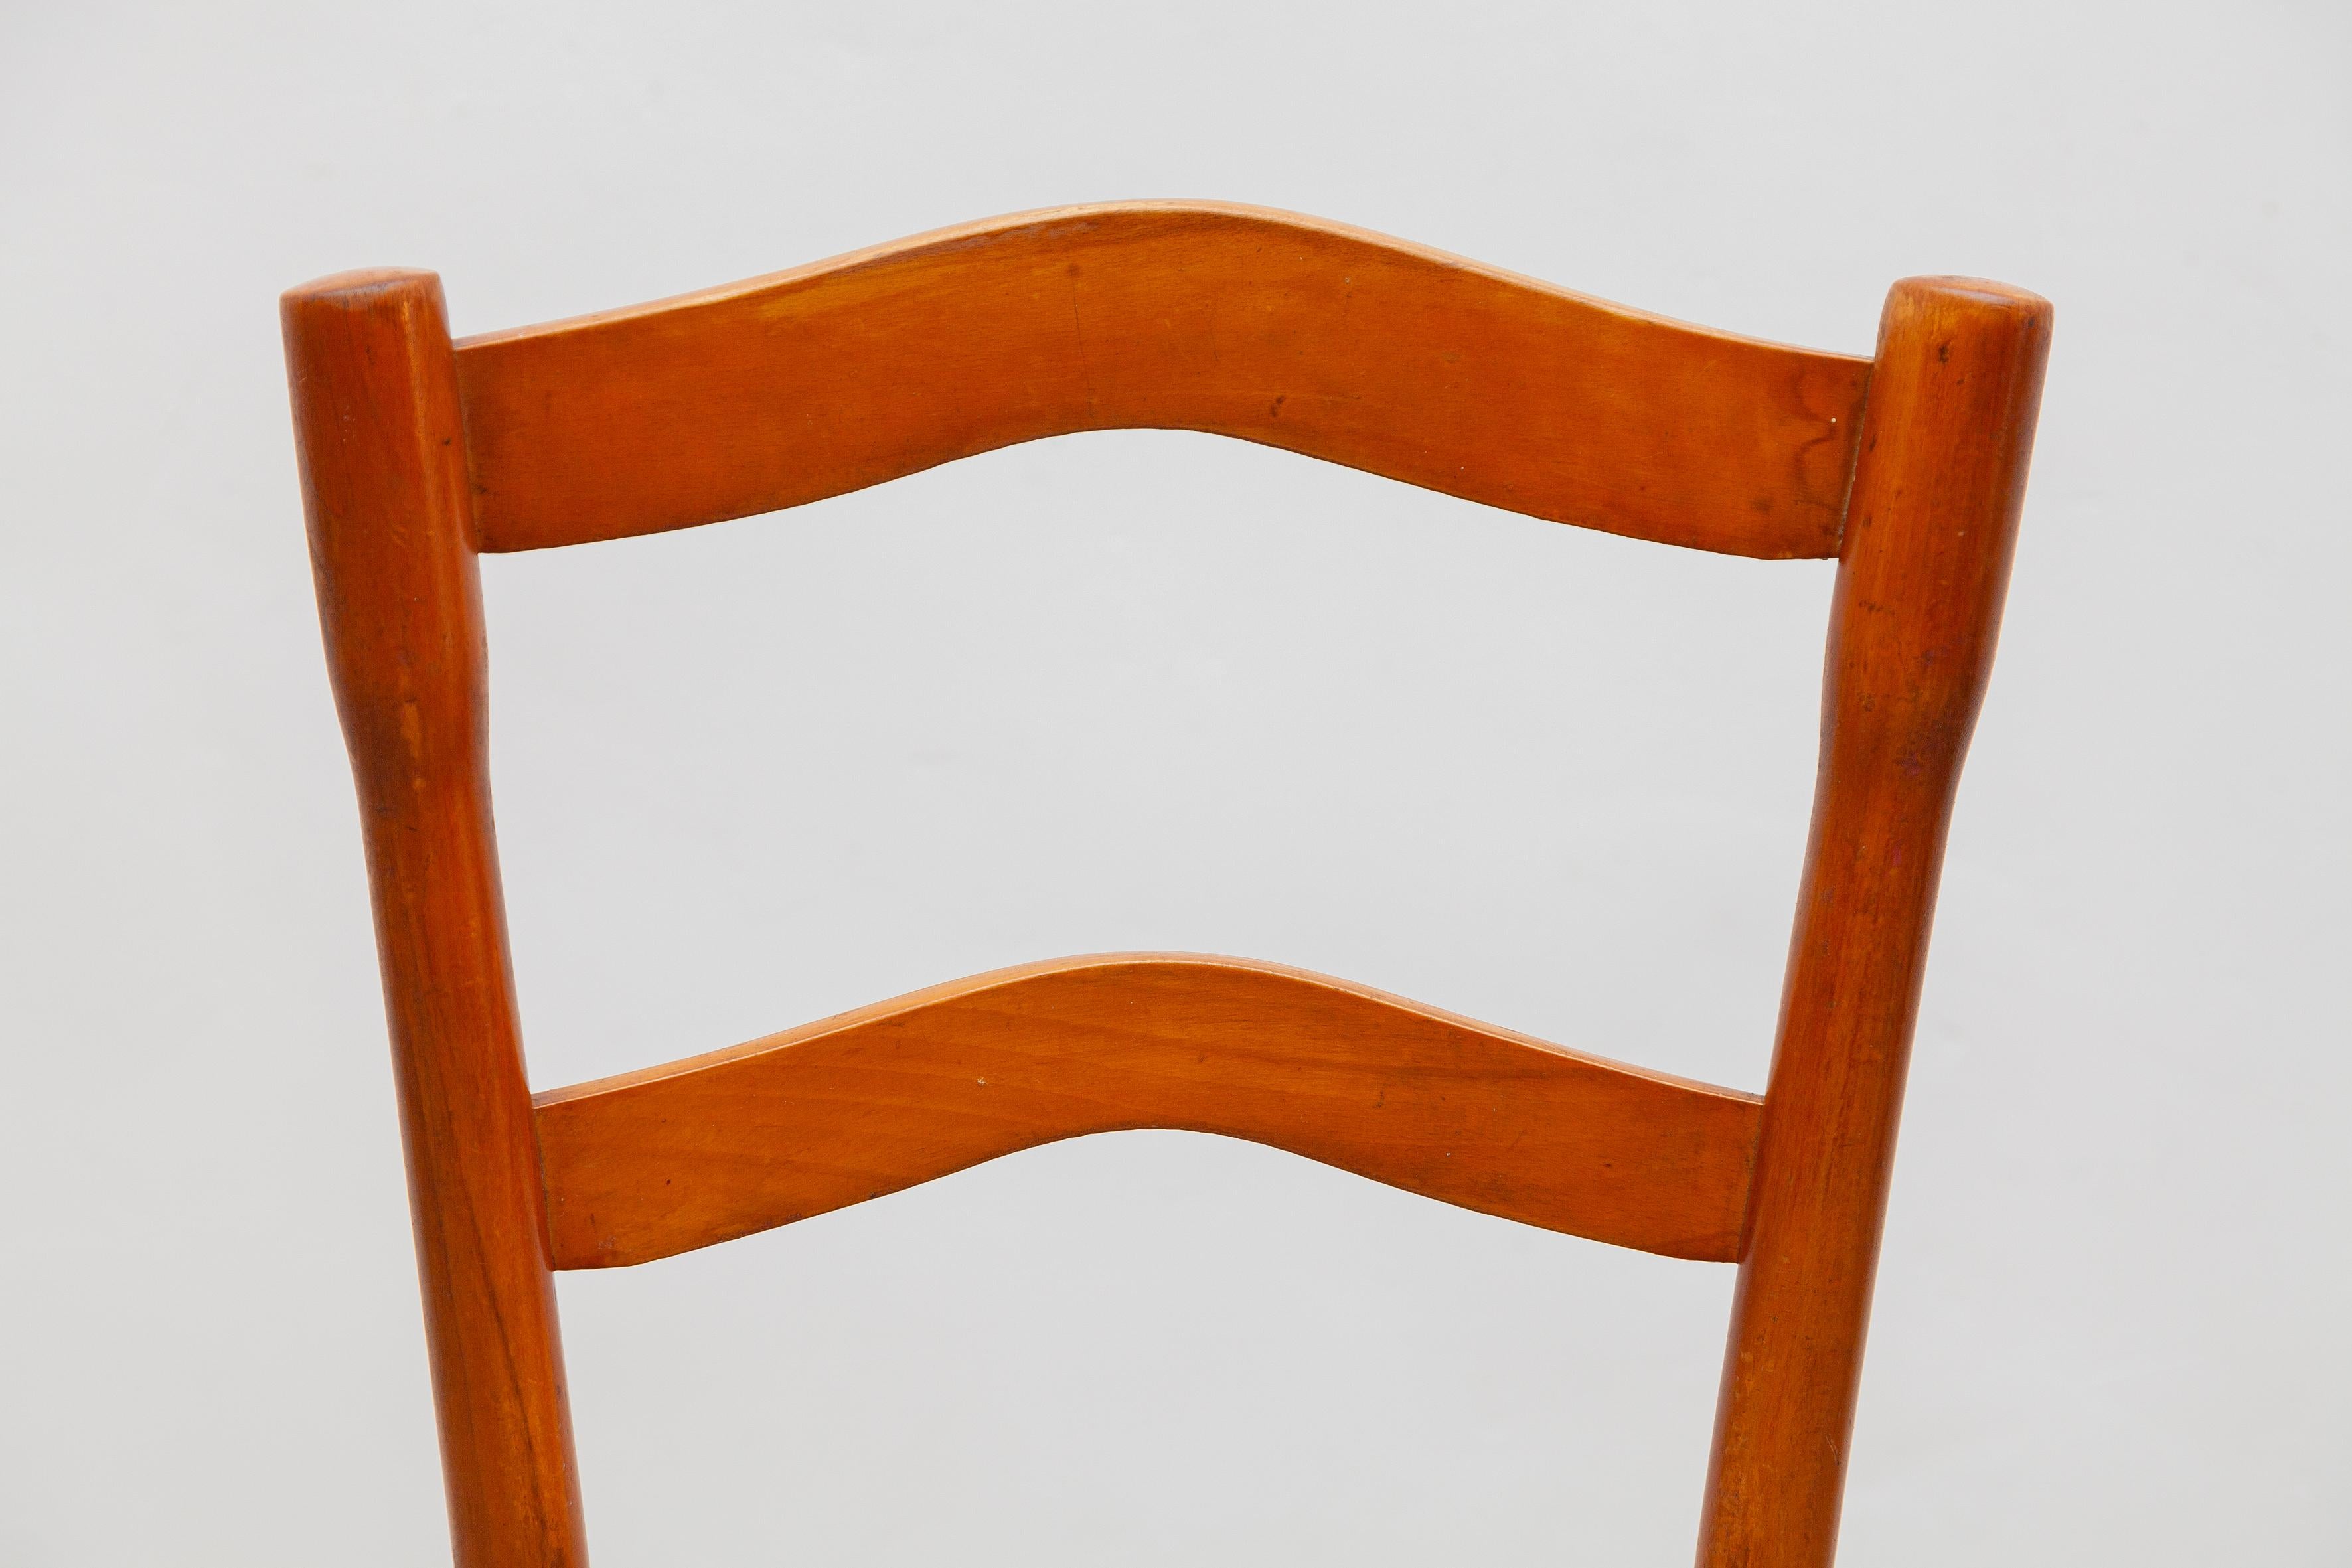 Early 20th Century Art Nouveau Side Chair Designed by Thonet, Austria, 1910 For Sale